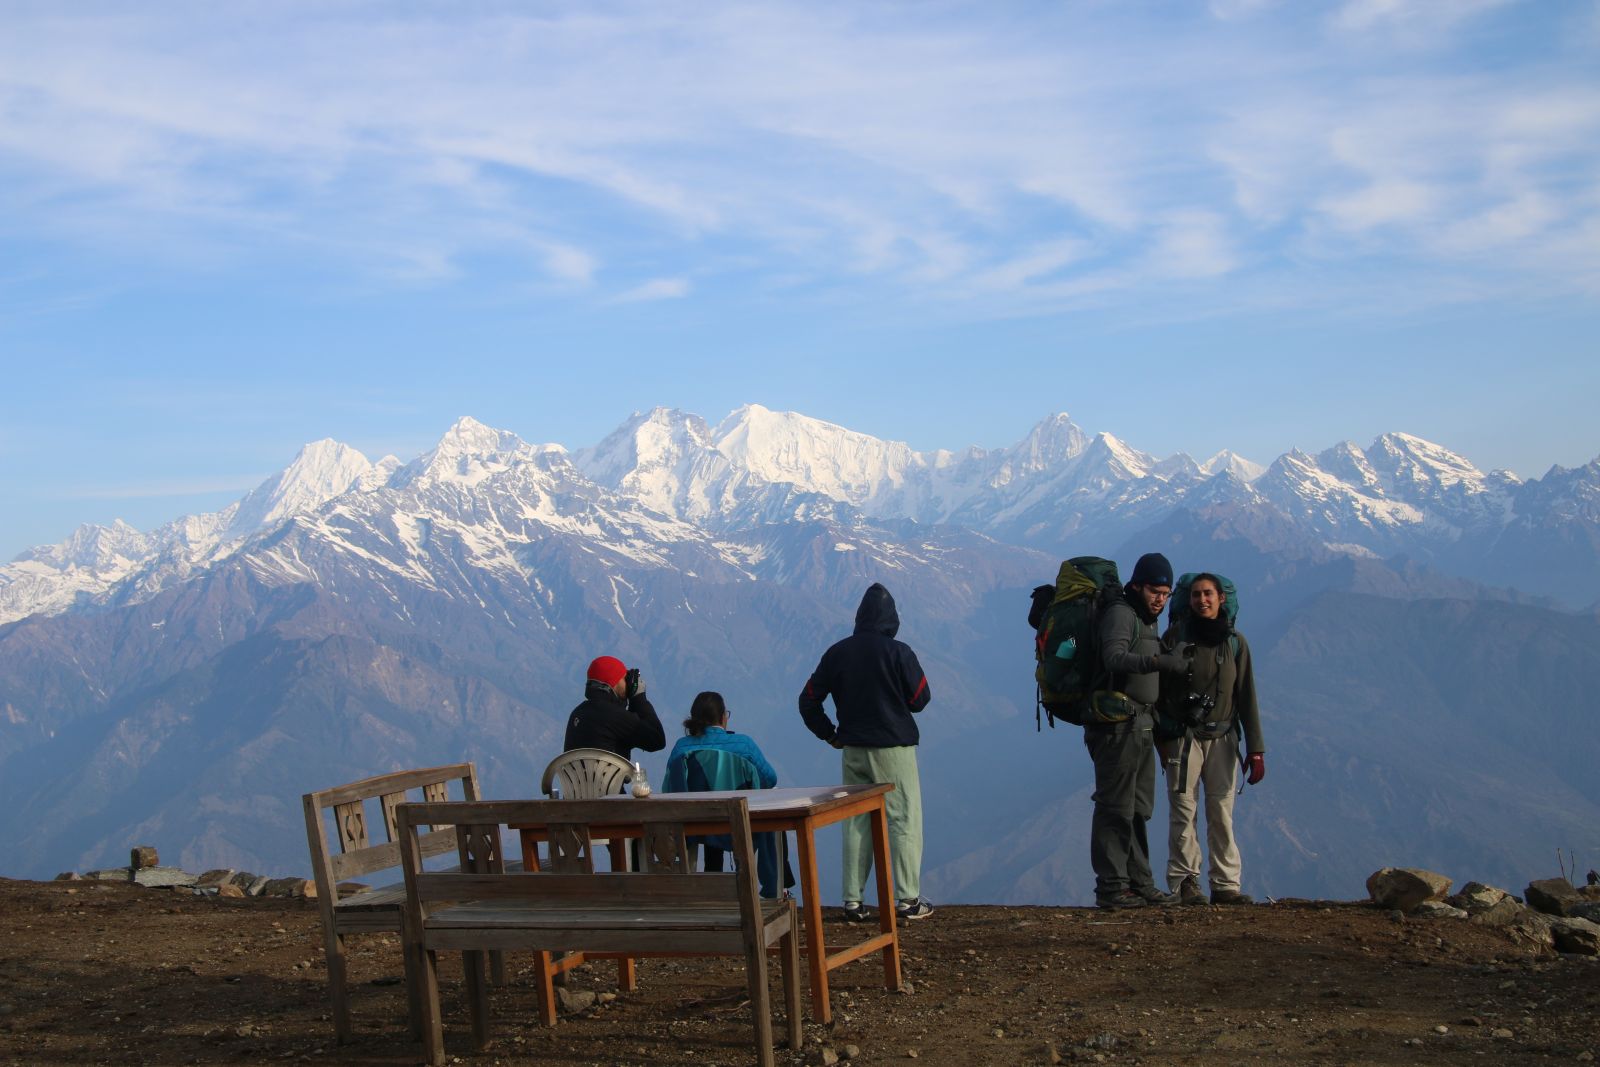 Amazing view of the mountains that you can enjoy during a trekking in Nepal